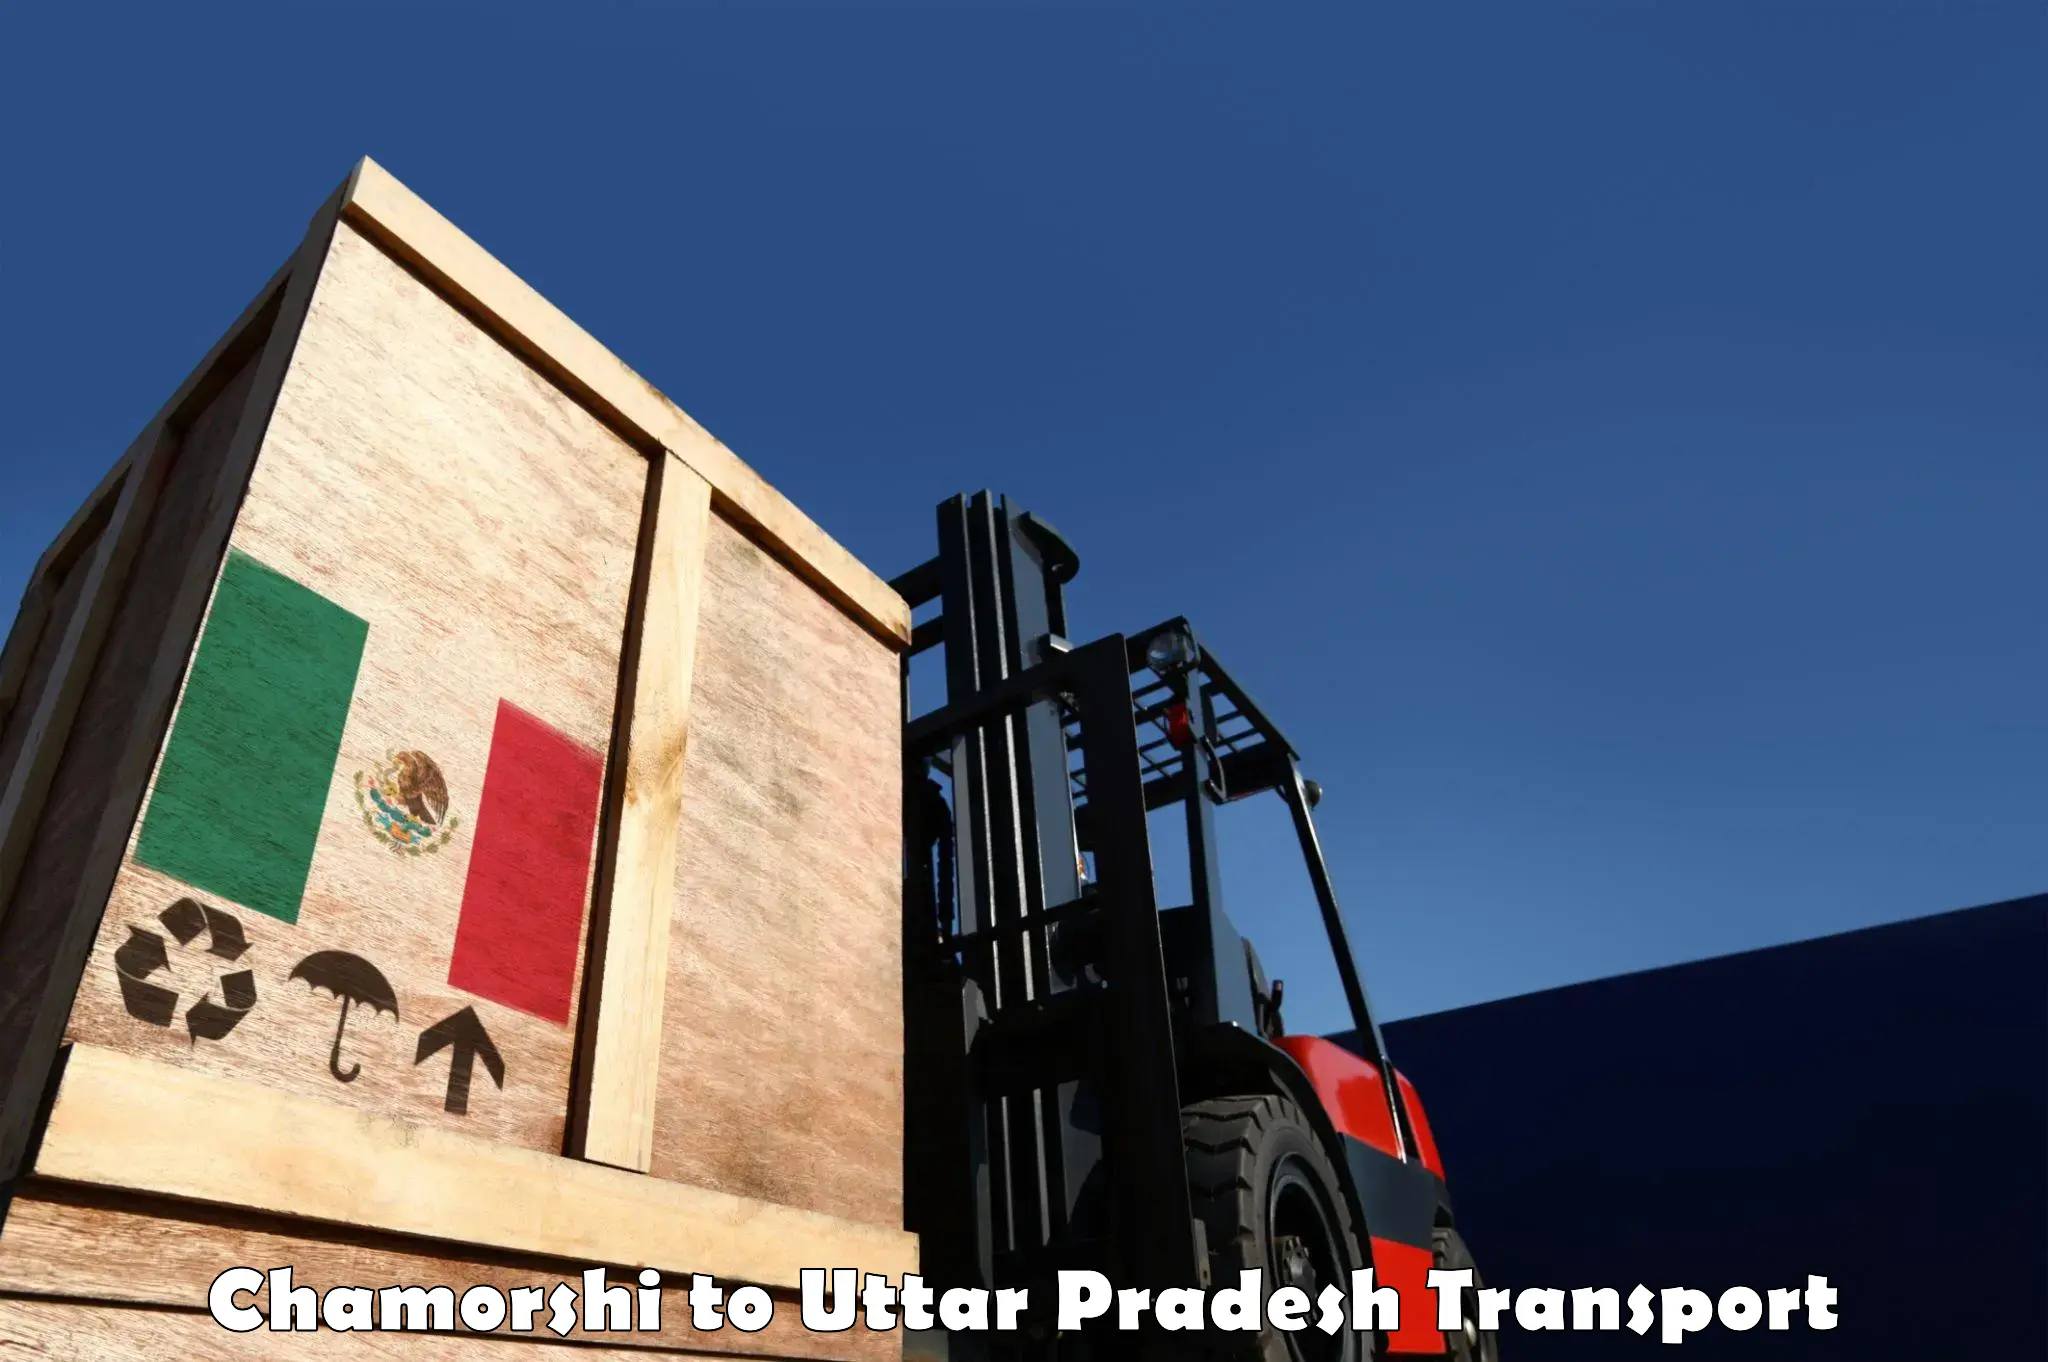 Road transport services in Chamorshi to Kanpur